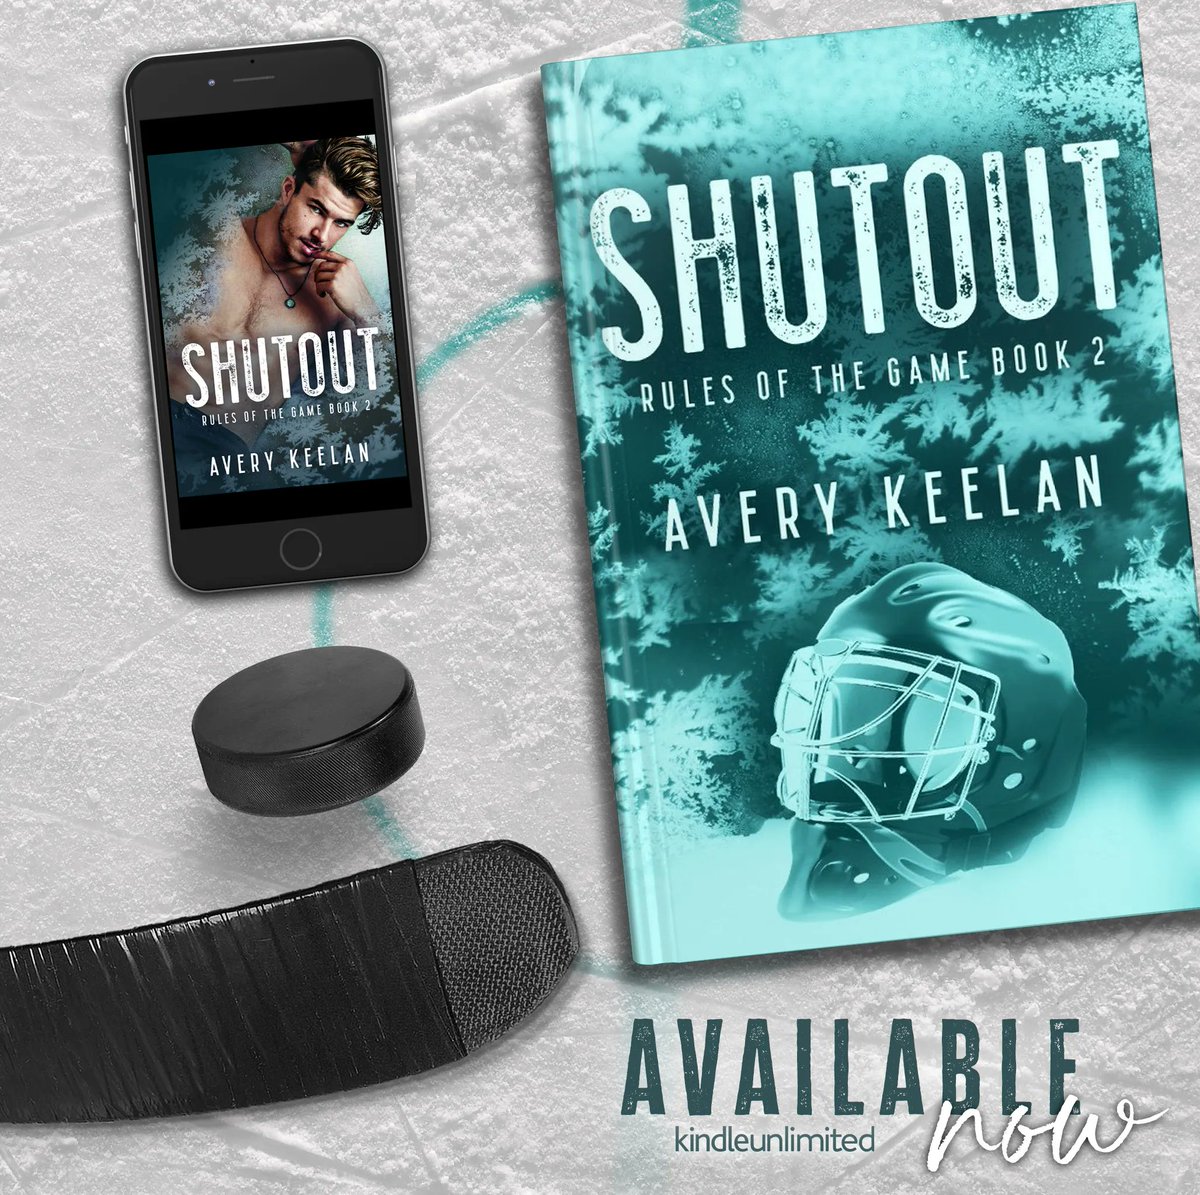 𝐒𝐇𝐔𝐓𝐎𝐔𝐓 by Avery Keelan is NOW AVAILABLE!! 

Grab your copy now! buff.ly/3CUtpEF 
Add to your GR TBR: buff.ly/3Ikg2kk
#averykeelanauthor #wordsmithpublicity